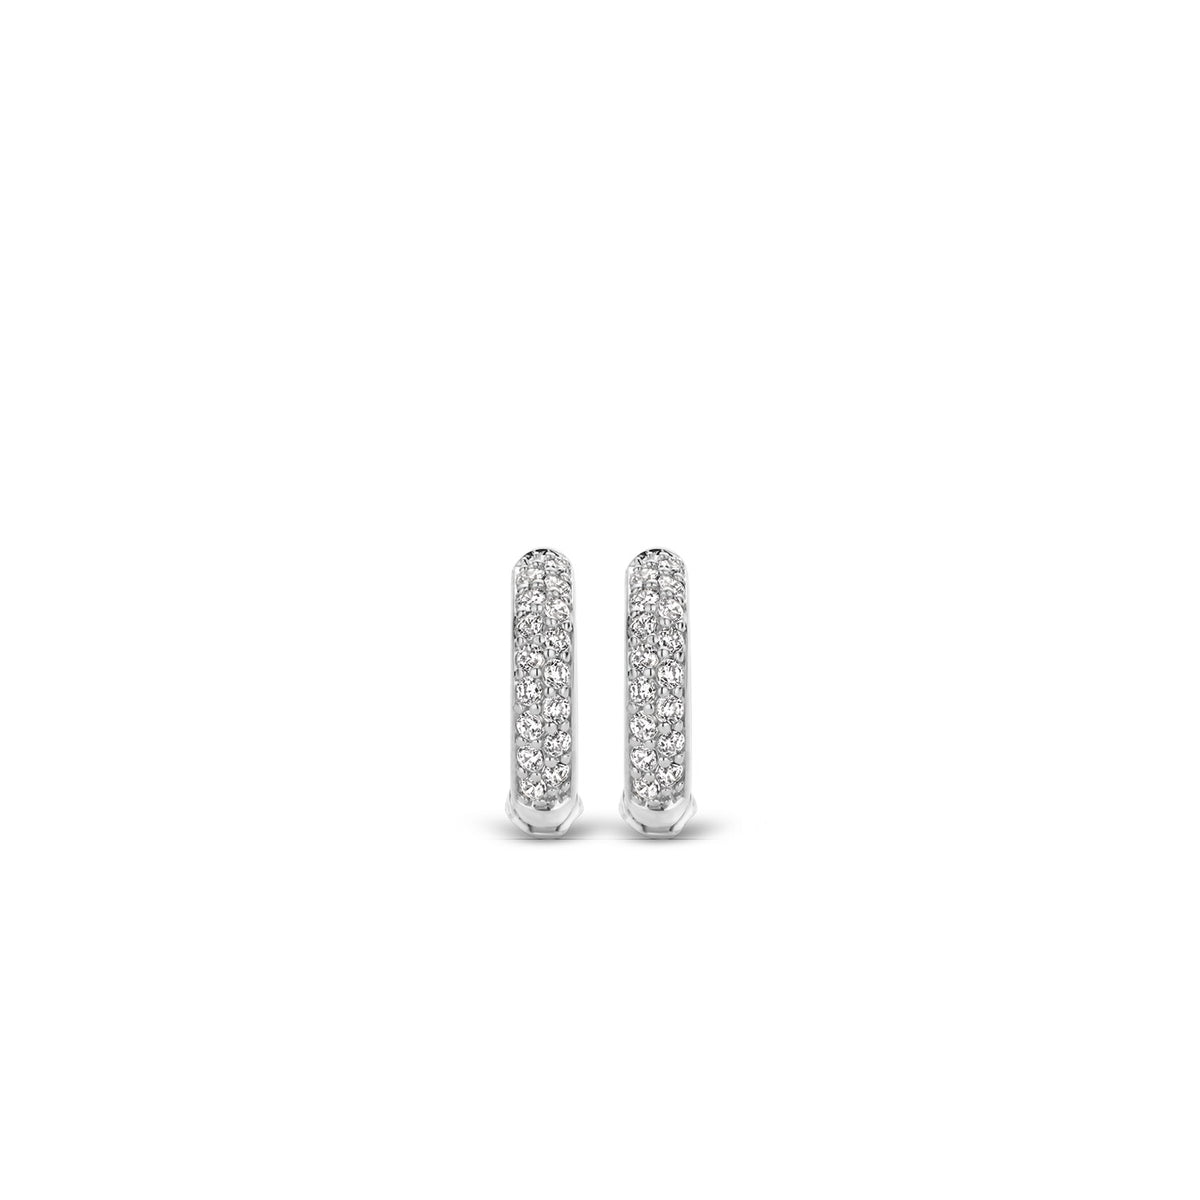 TI SENTO Sterling Silver Two Row Pave Set Cubic Zirconia Huggie Earrings